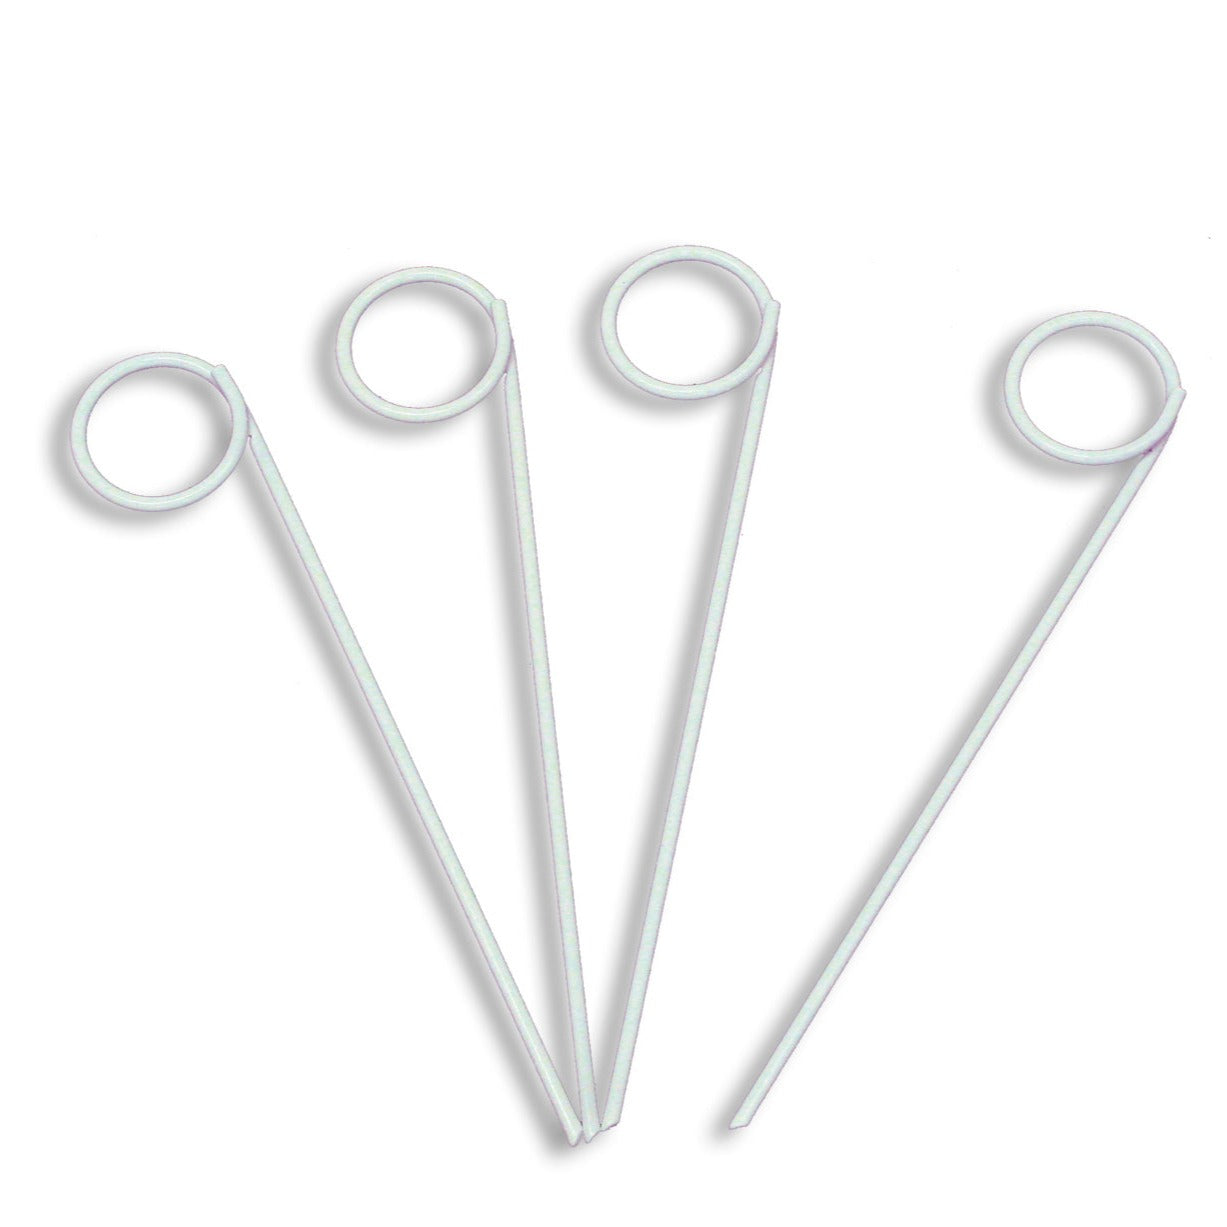 Plant protector stakes 4-pack